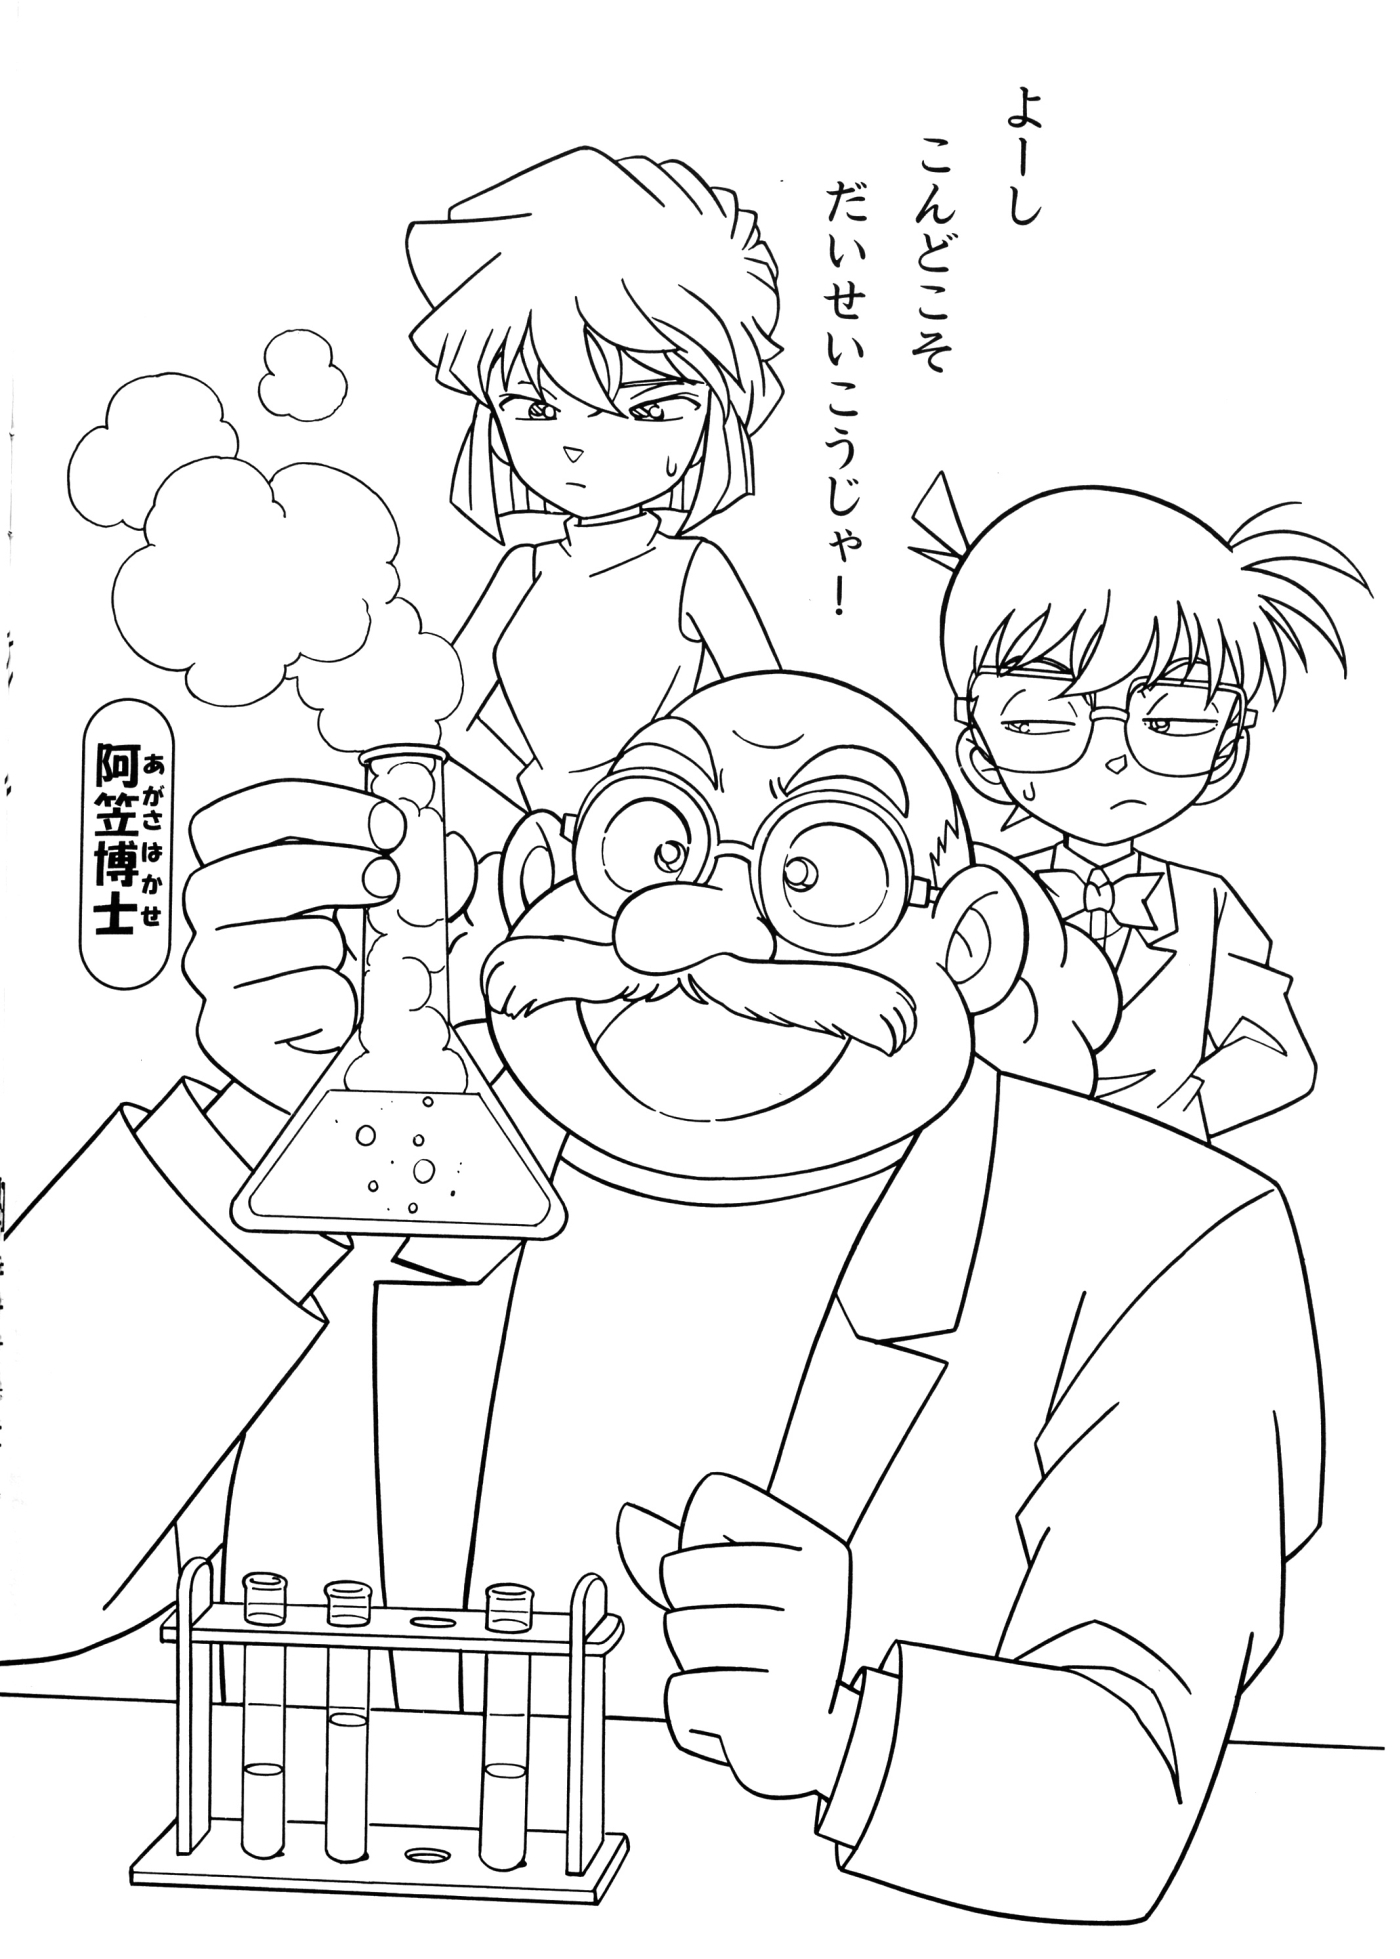 Detective Conan Quotes And Sayings. QuotesGram